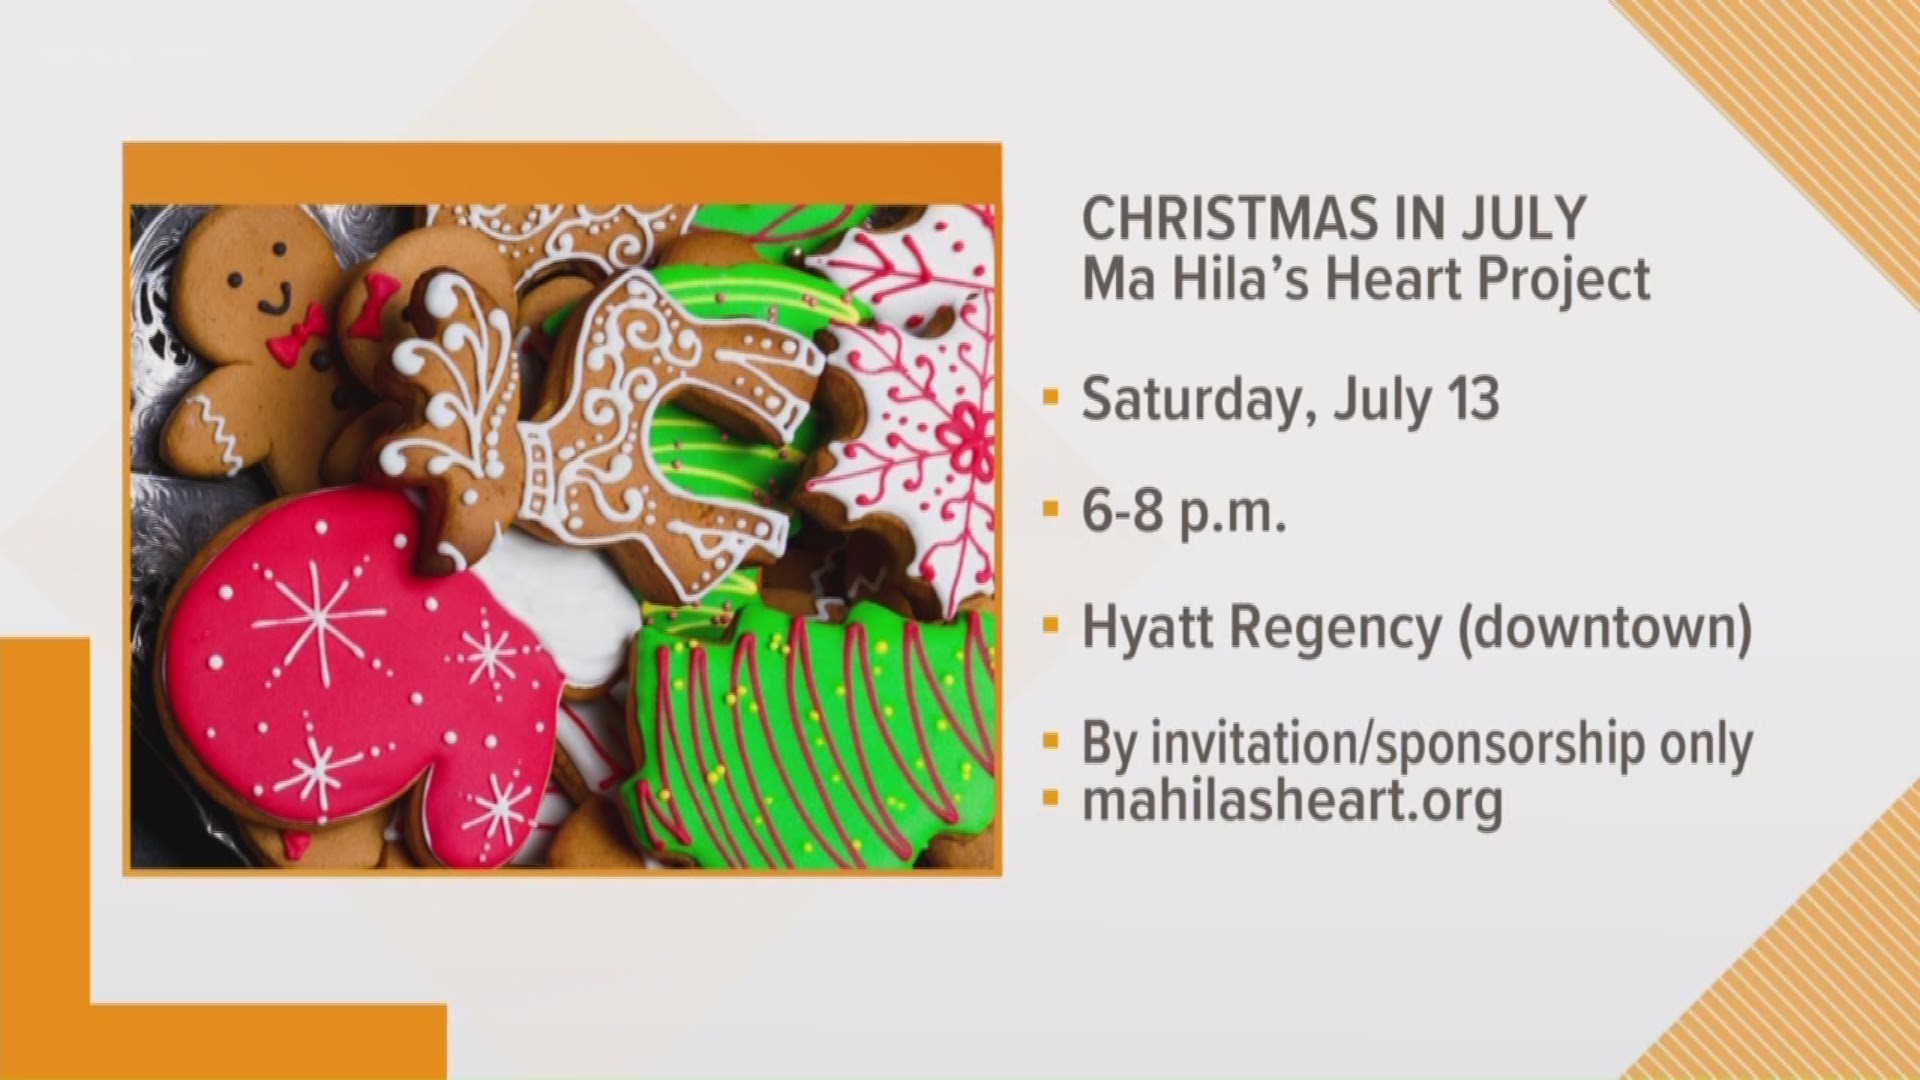 Ma Hila's Heart Project will host Christmas in July next month for children battling cancer.